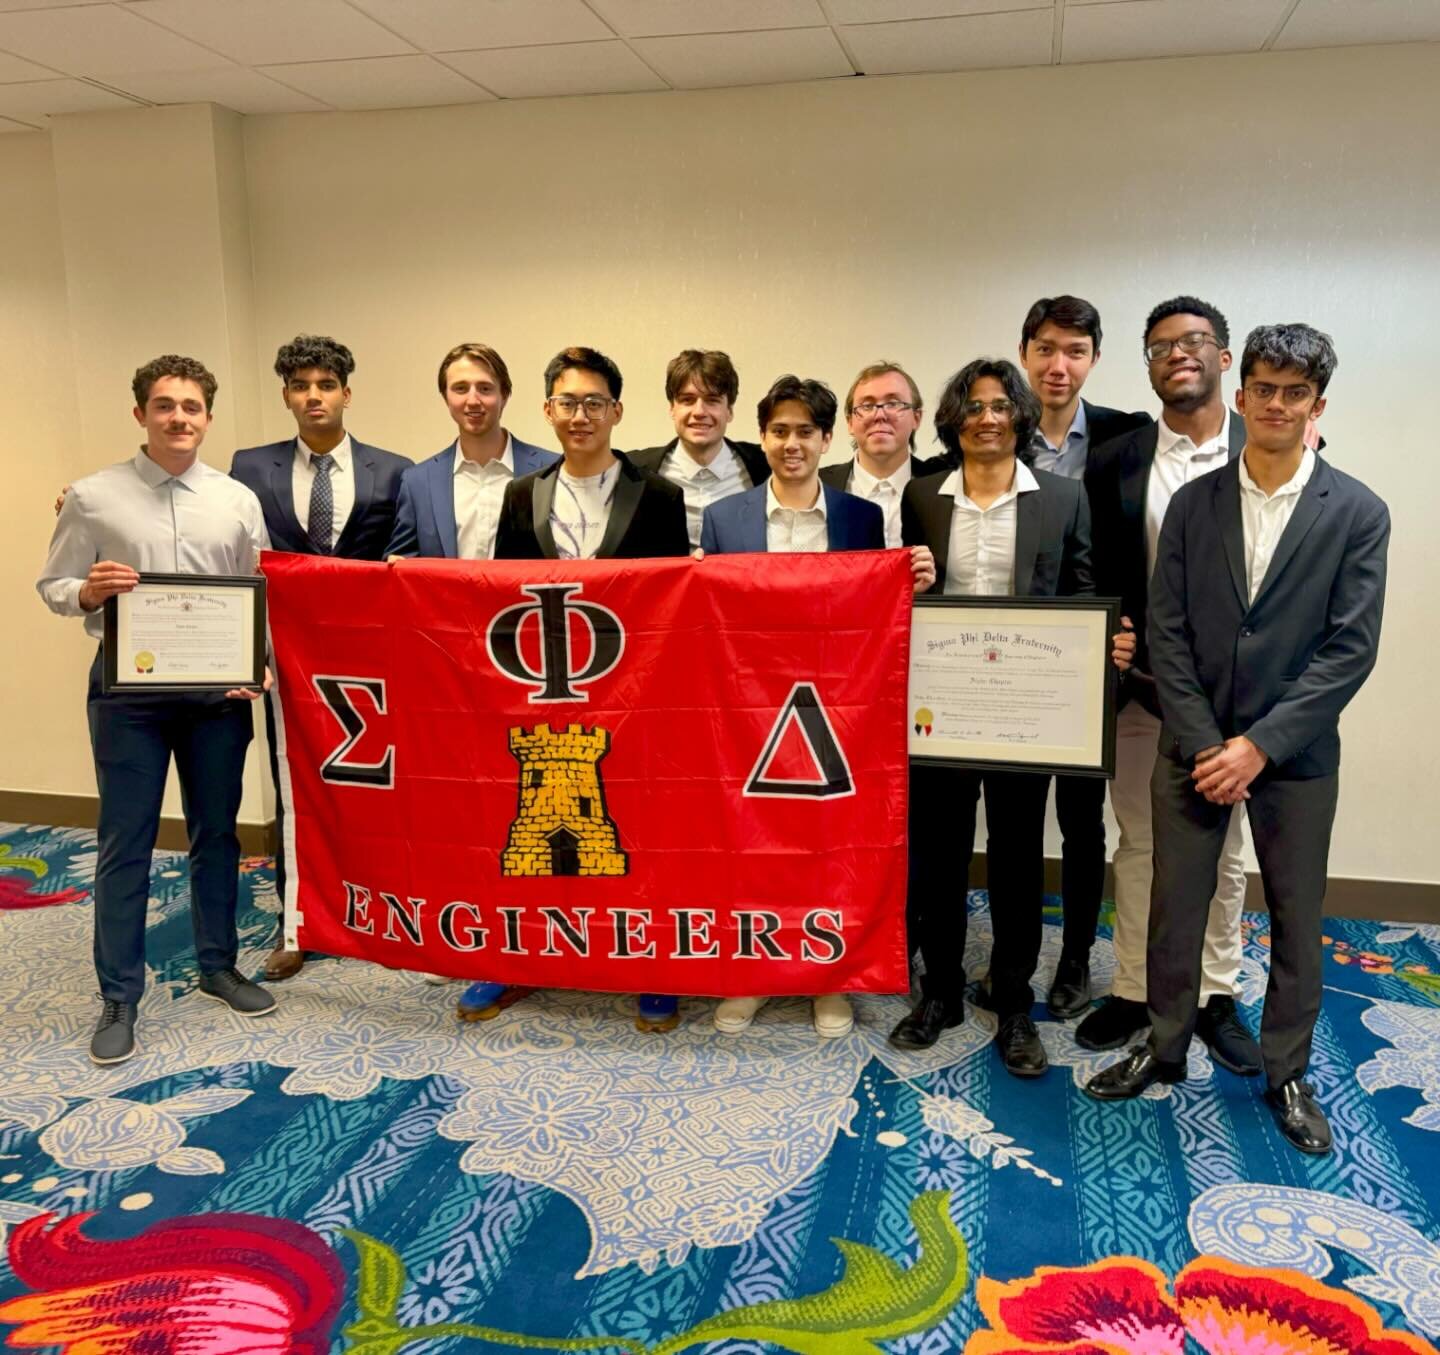 We are excited to announce the return of Alpha Chapter at the University of Southern California! On December 2nd, we held a successful Charter Weekend to formally initiate our new Brothers. Thank you to everyone who helped make this a fantastic event